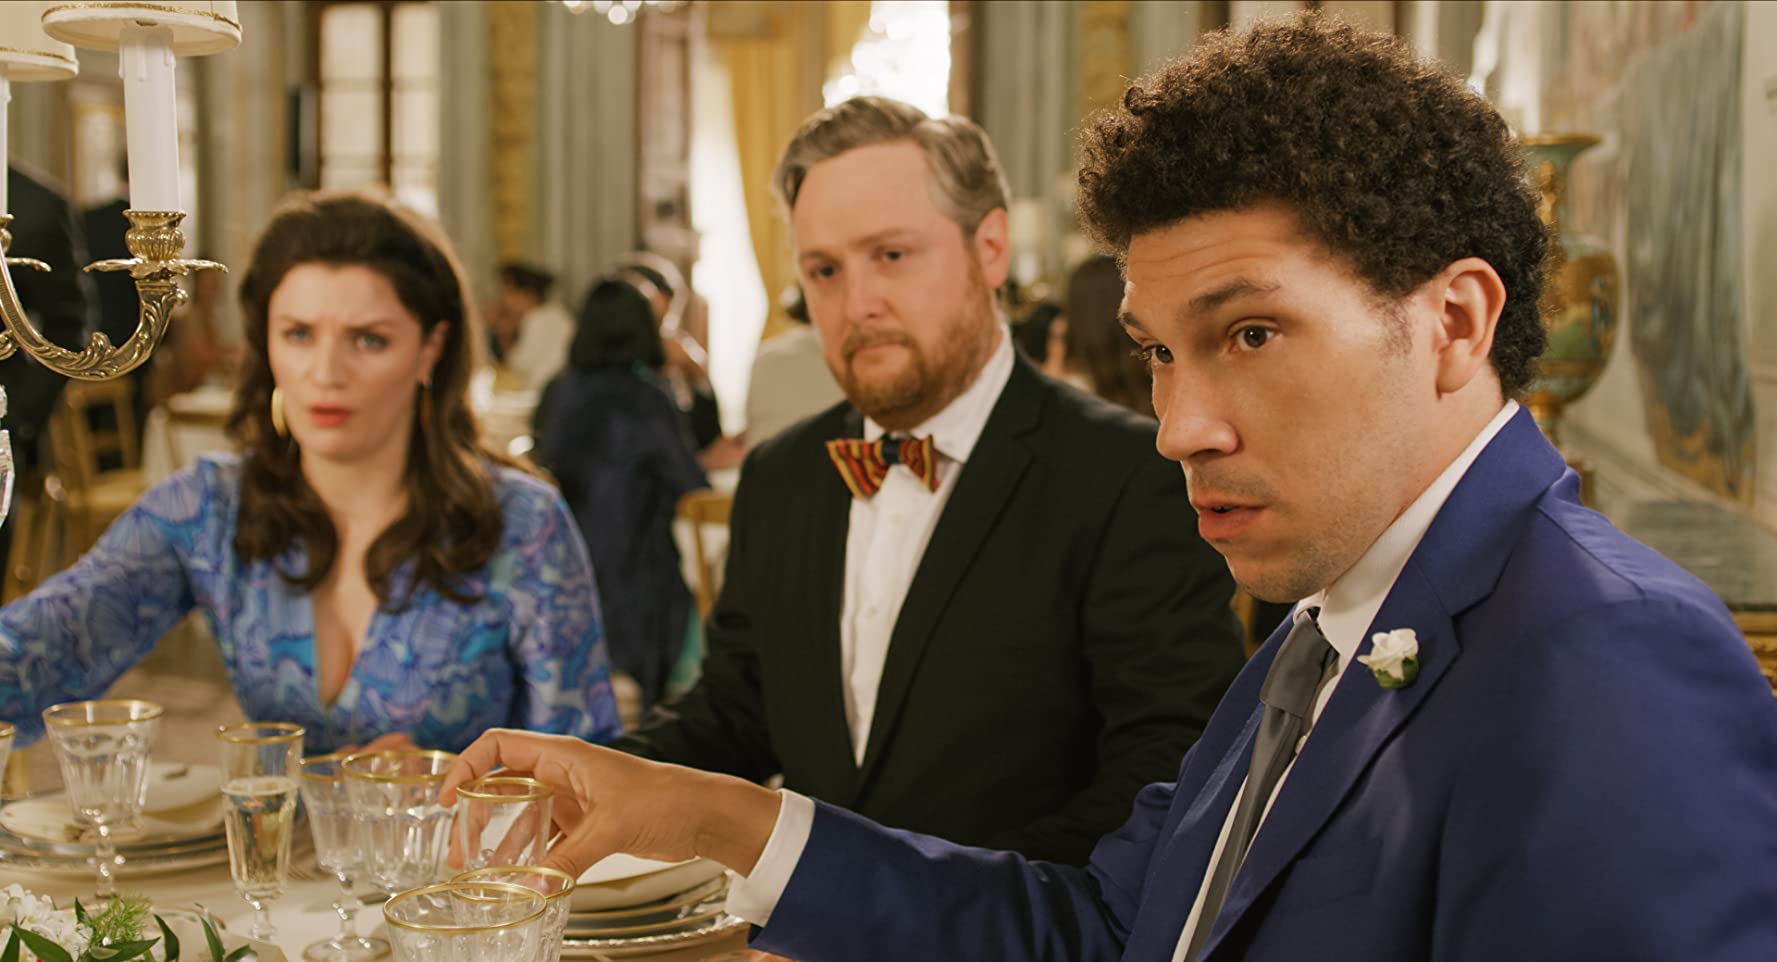 Aisling Bea, Tim Key and Joel Fry in Netflix's romantic comedy 'Love Wedding Repeat' (2020)